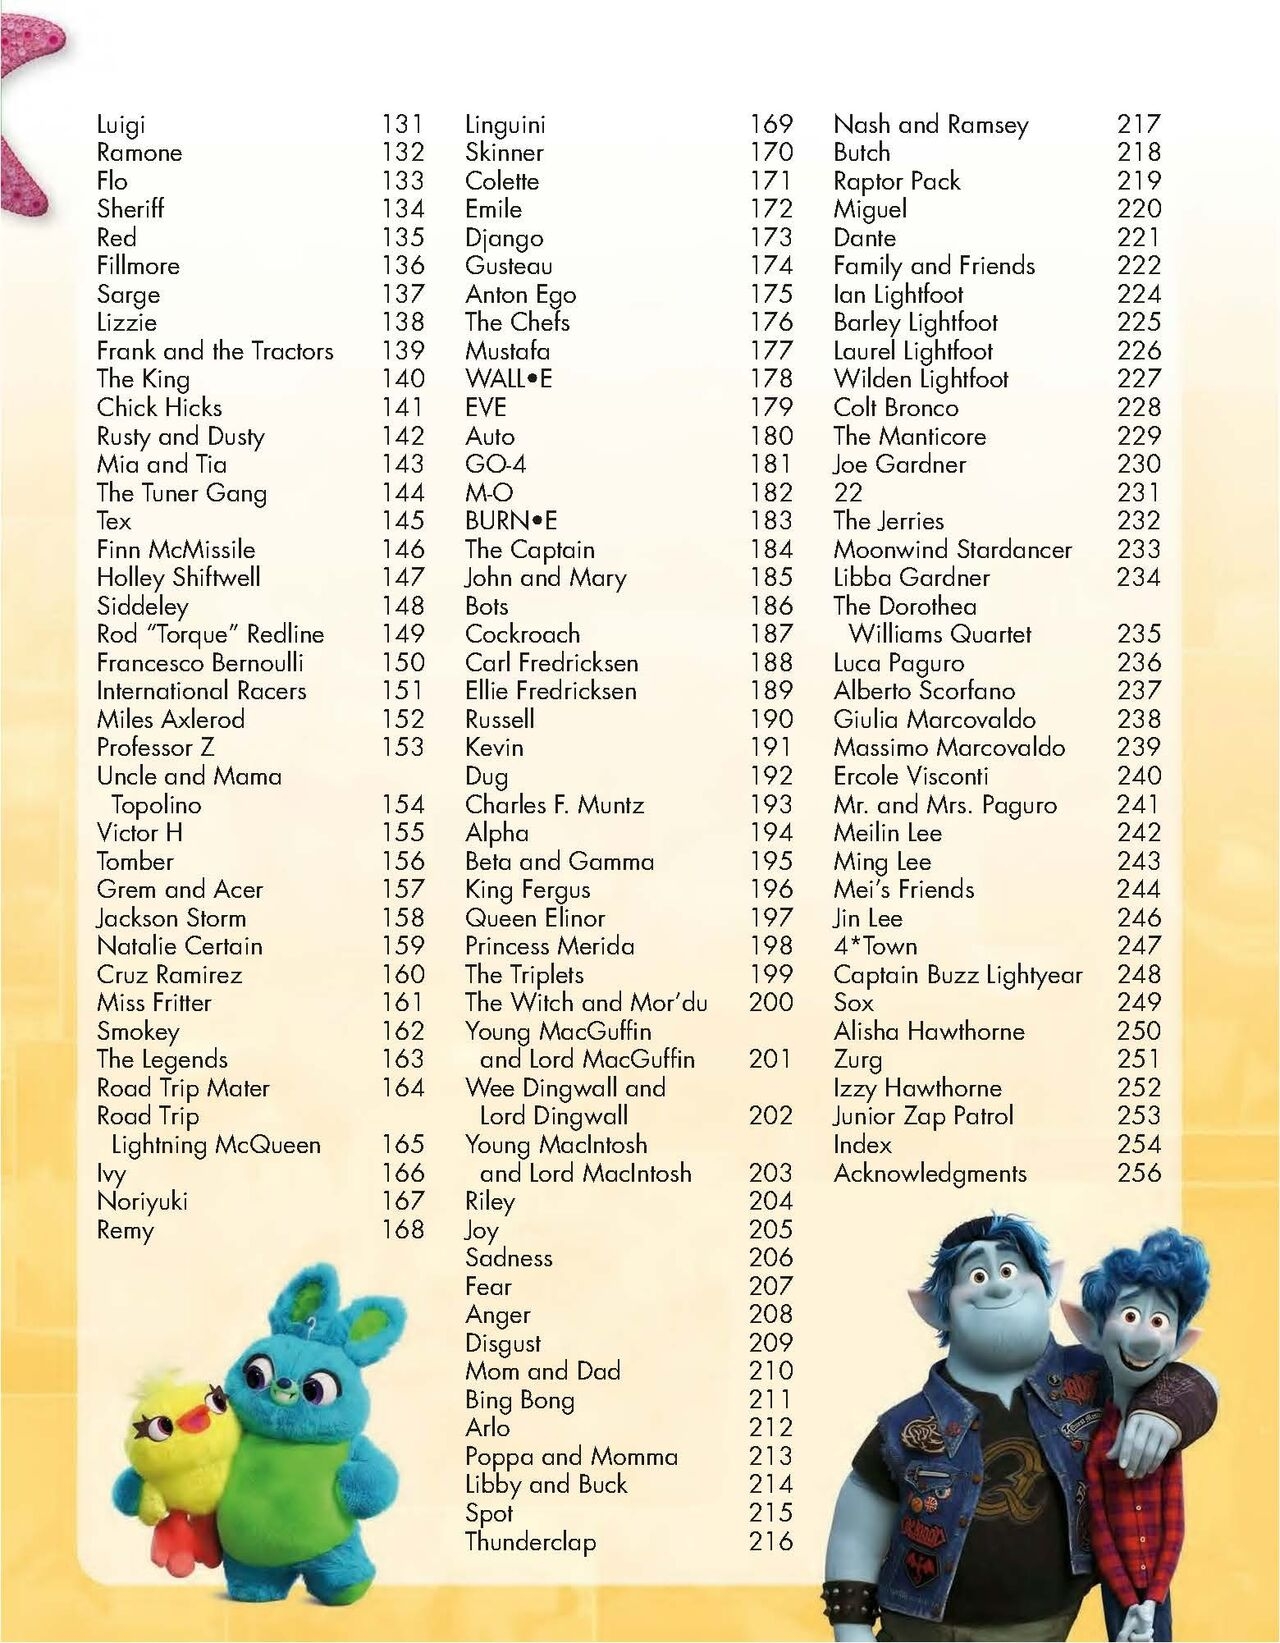 Disney Pixar Character Encyclopedia Updated and Expanded 4